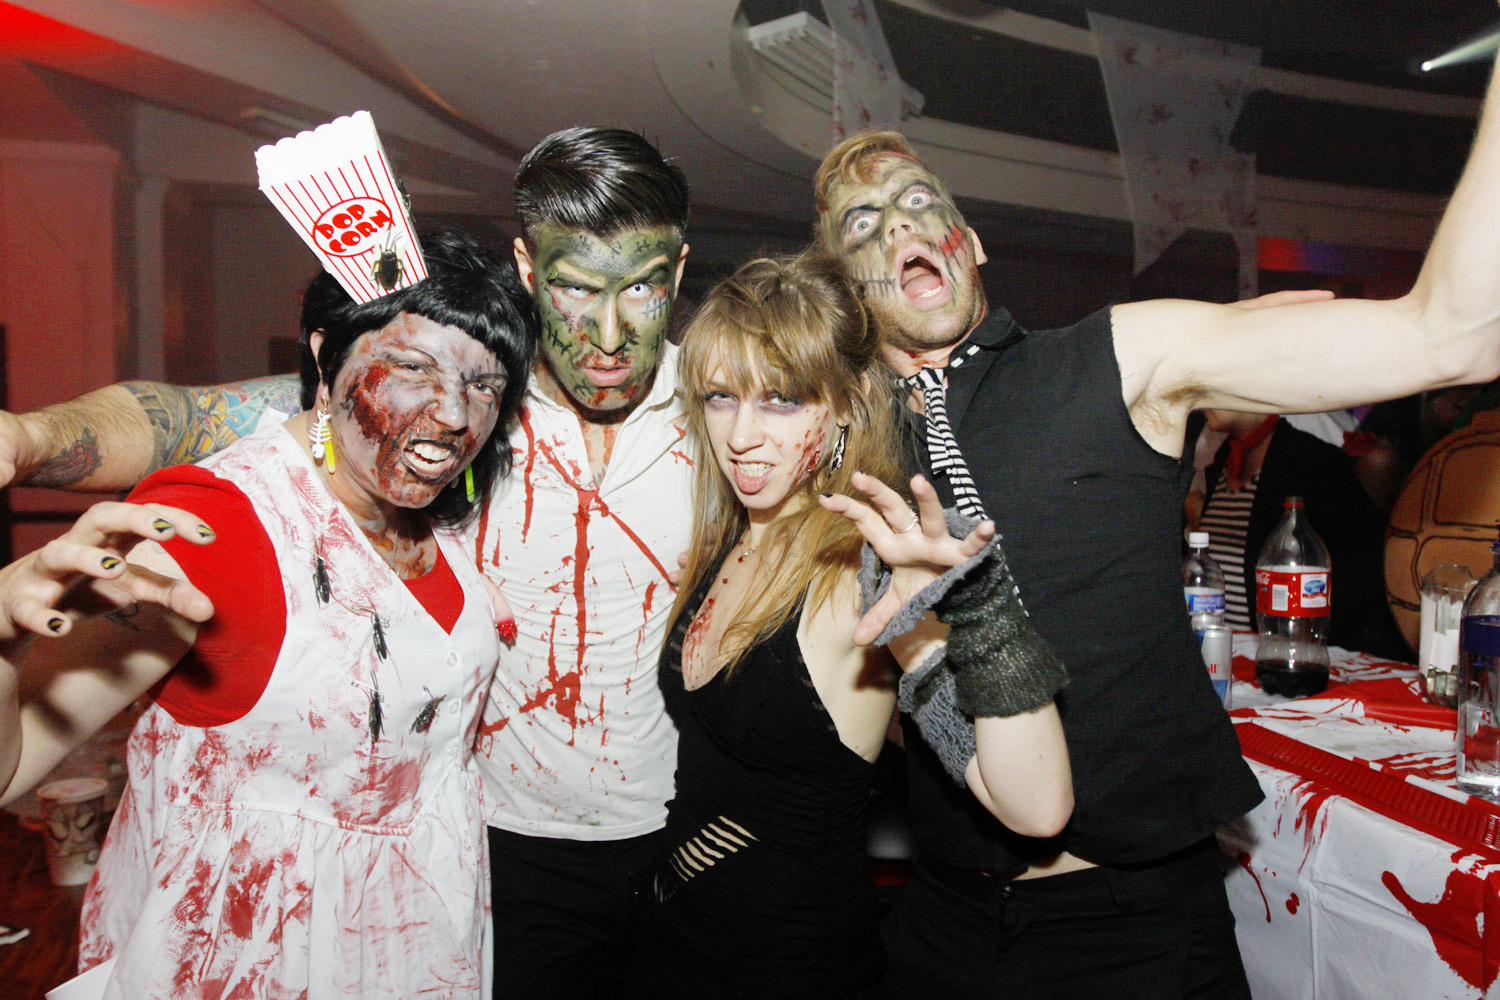 Zombie Attack @ Brooklyn Masonic Temple on October 30, 2010